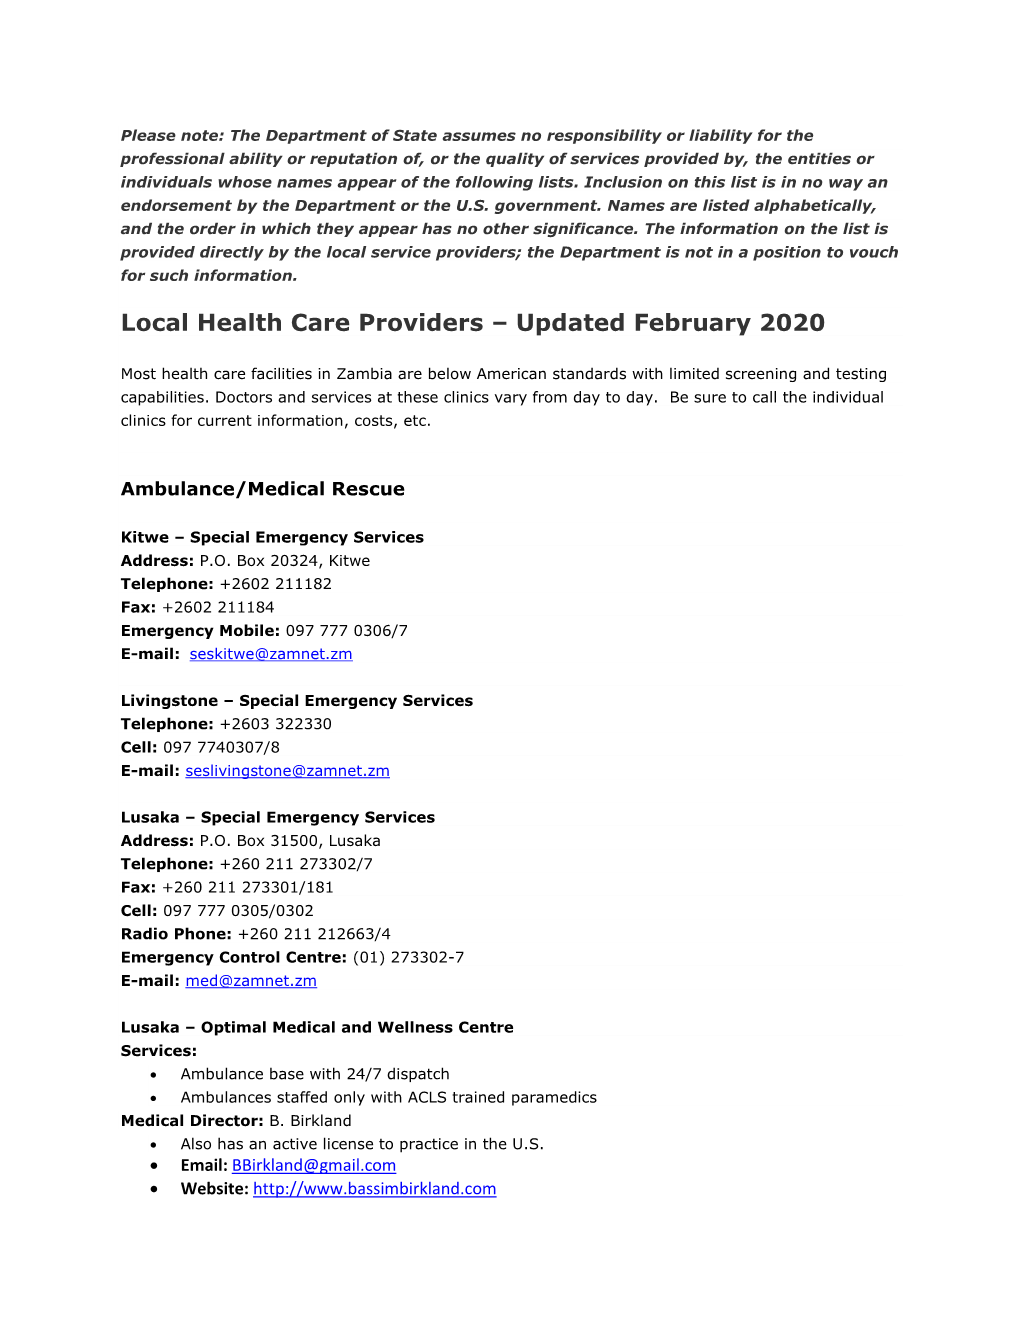 Local Health Care Providers – Updated February 2020